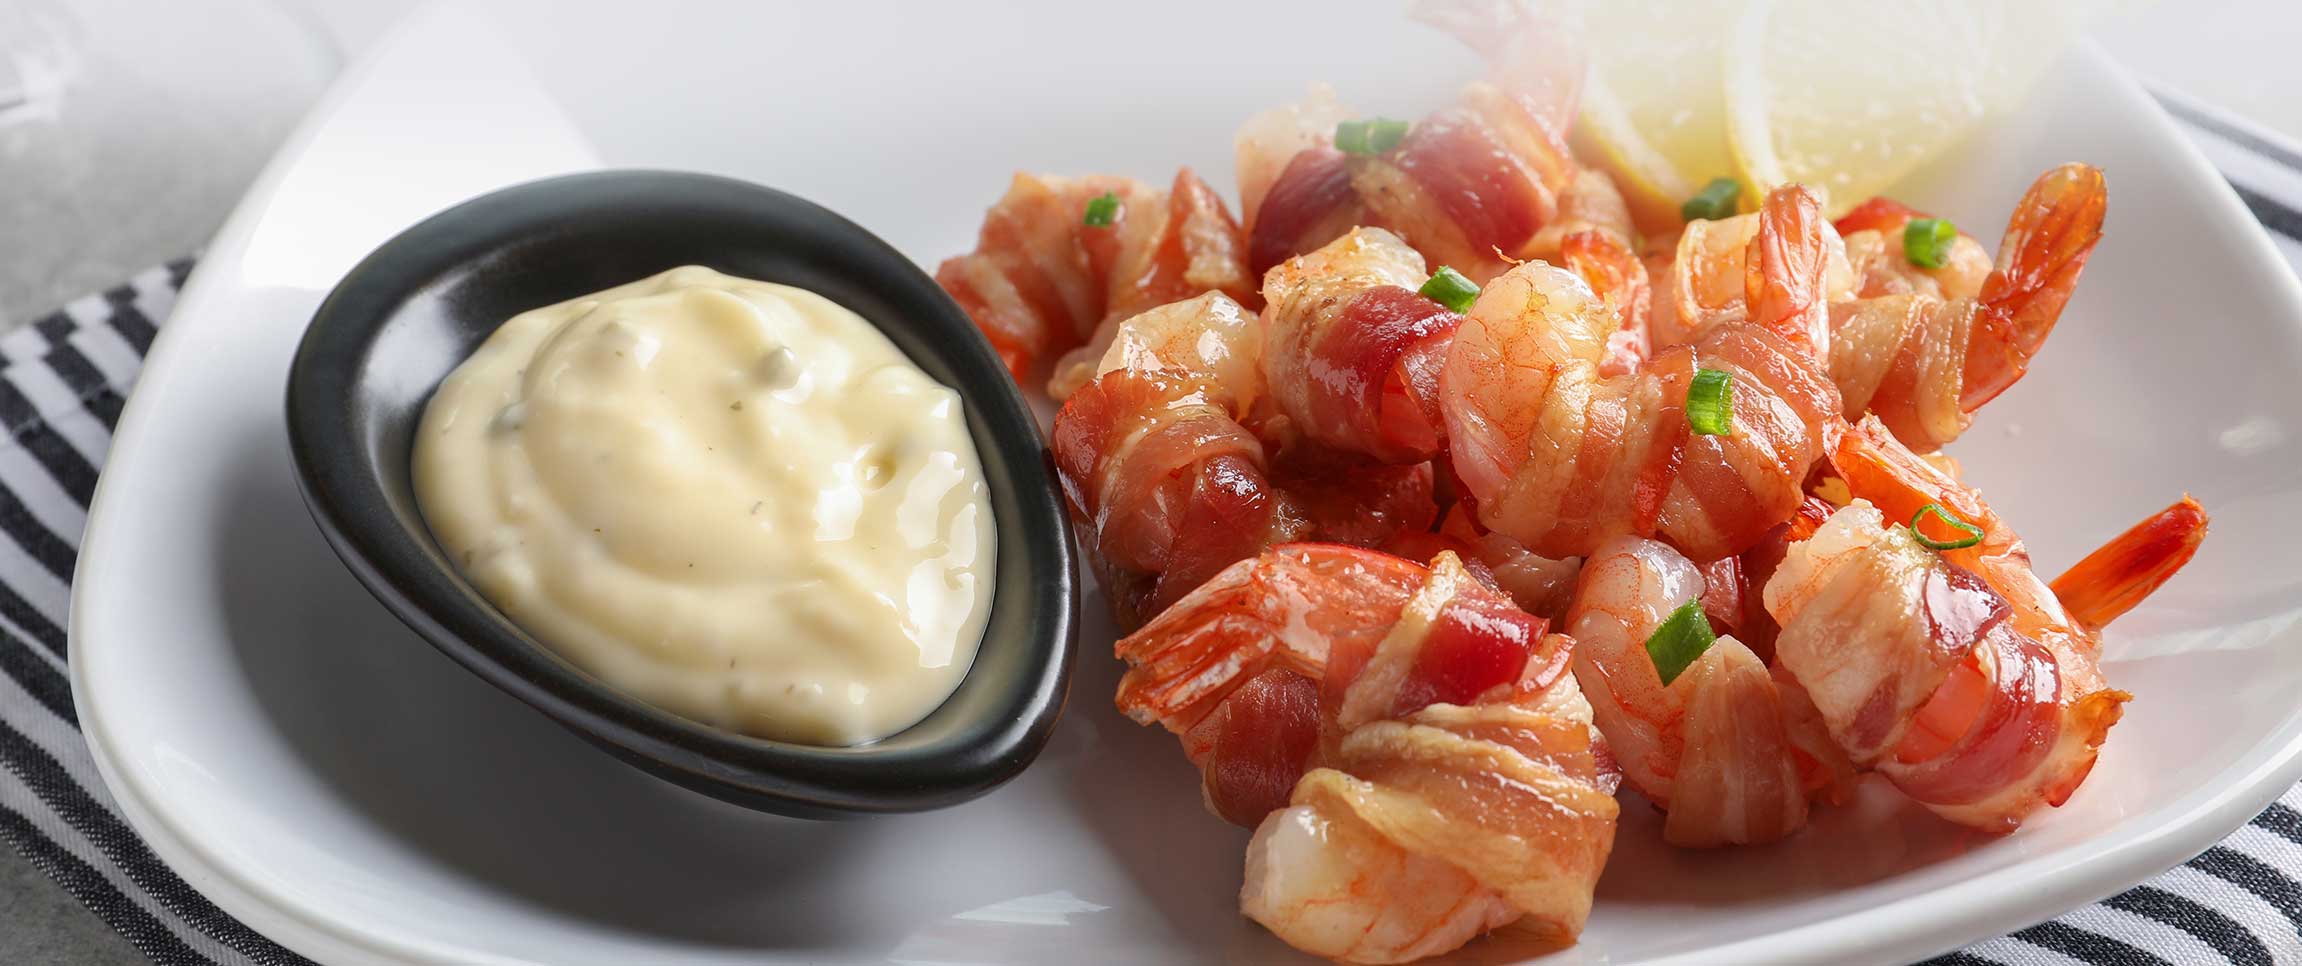 Bacon Wrapped Shrimp with Dipping Sauce